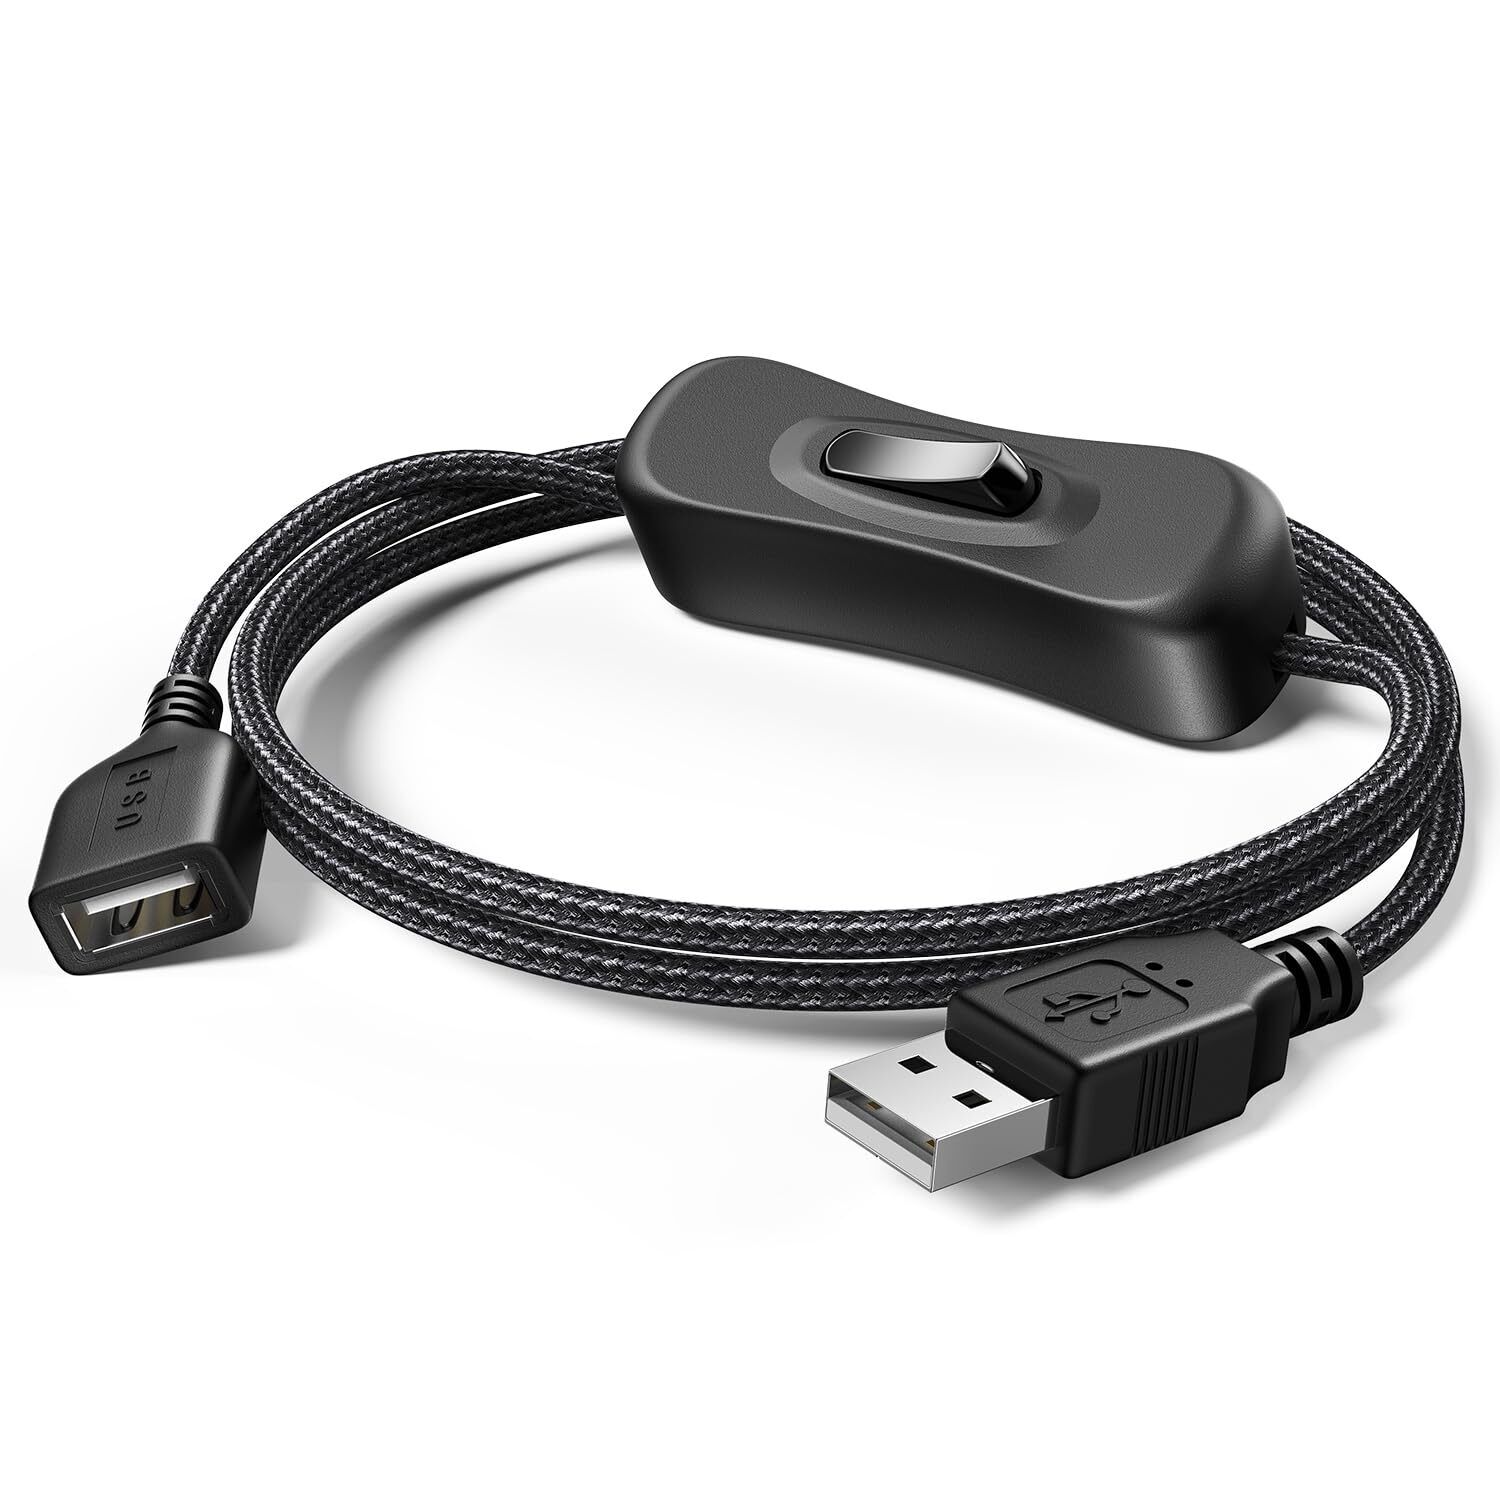 USB Switch Extension Cable, Upgraded USB Extension Cord with On/Off Power Swi...